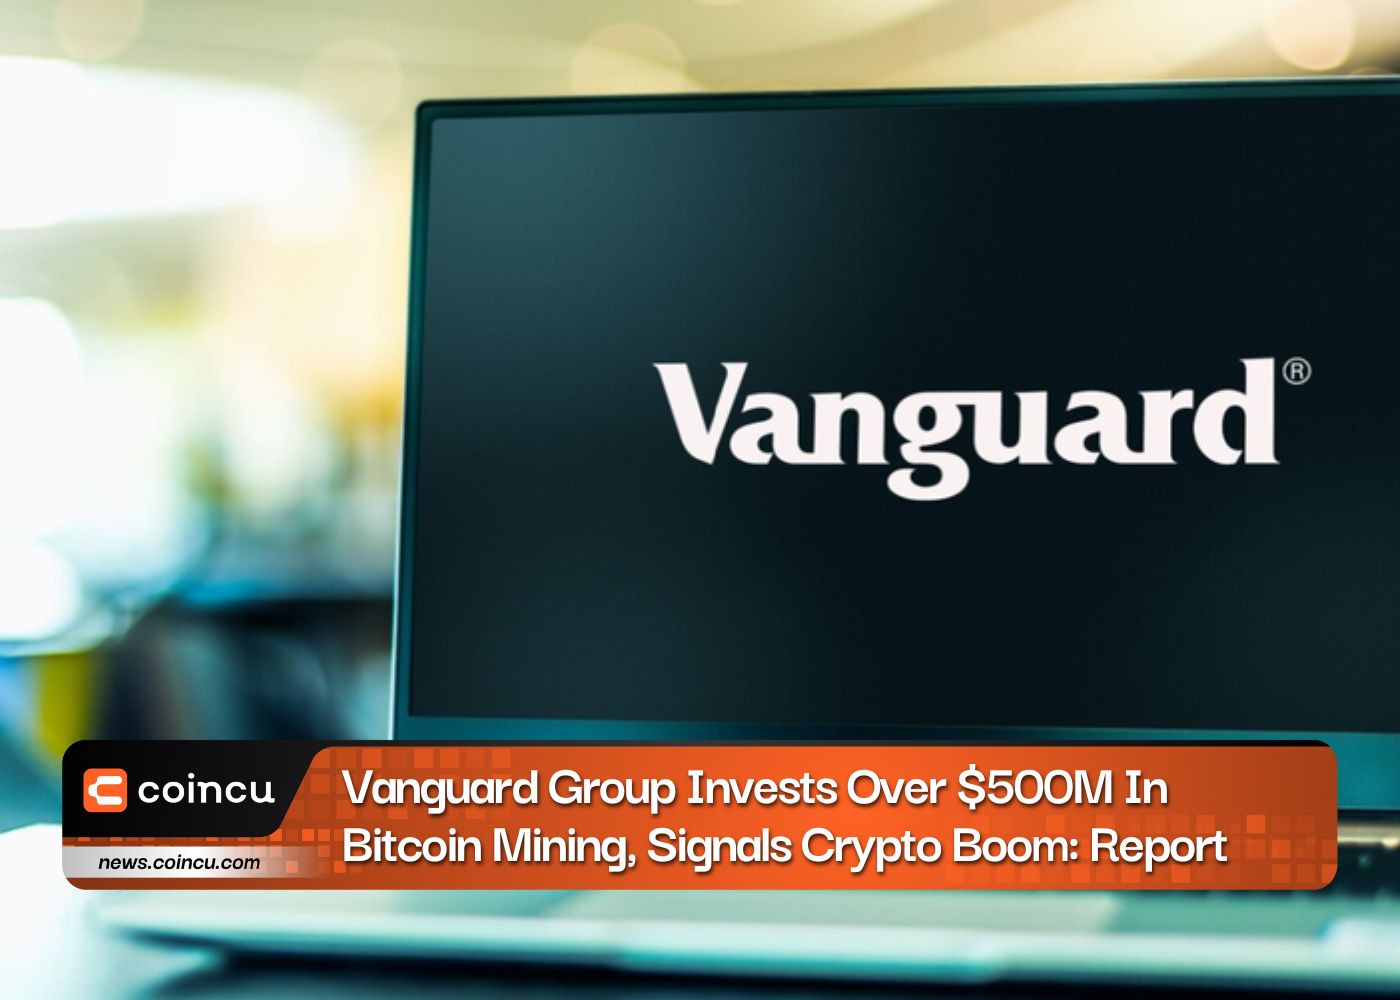 Vanguard Group Invests Over $500M In Bitcoin Mining, Signals Crypto Boom: Report